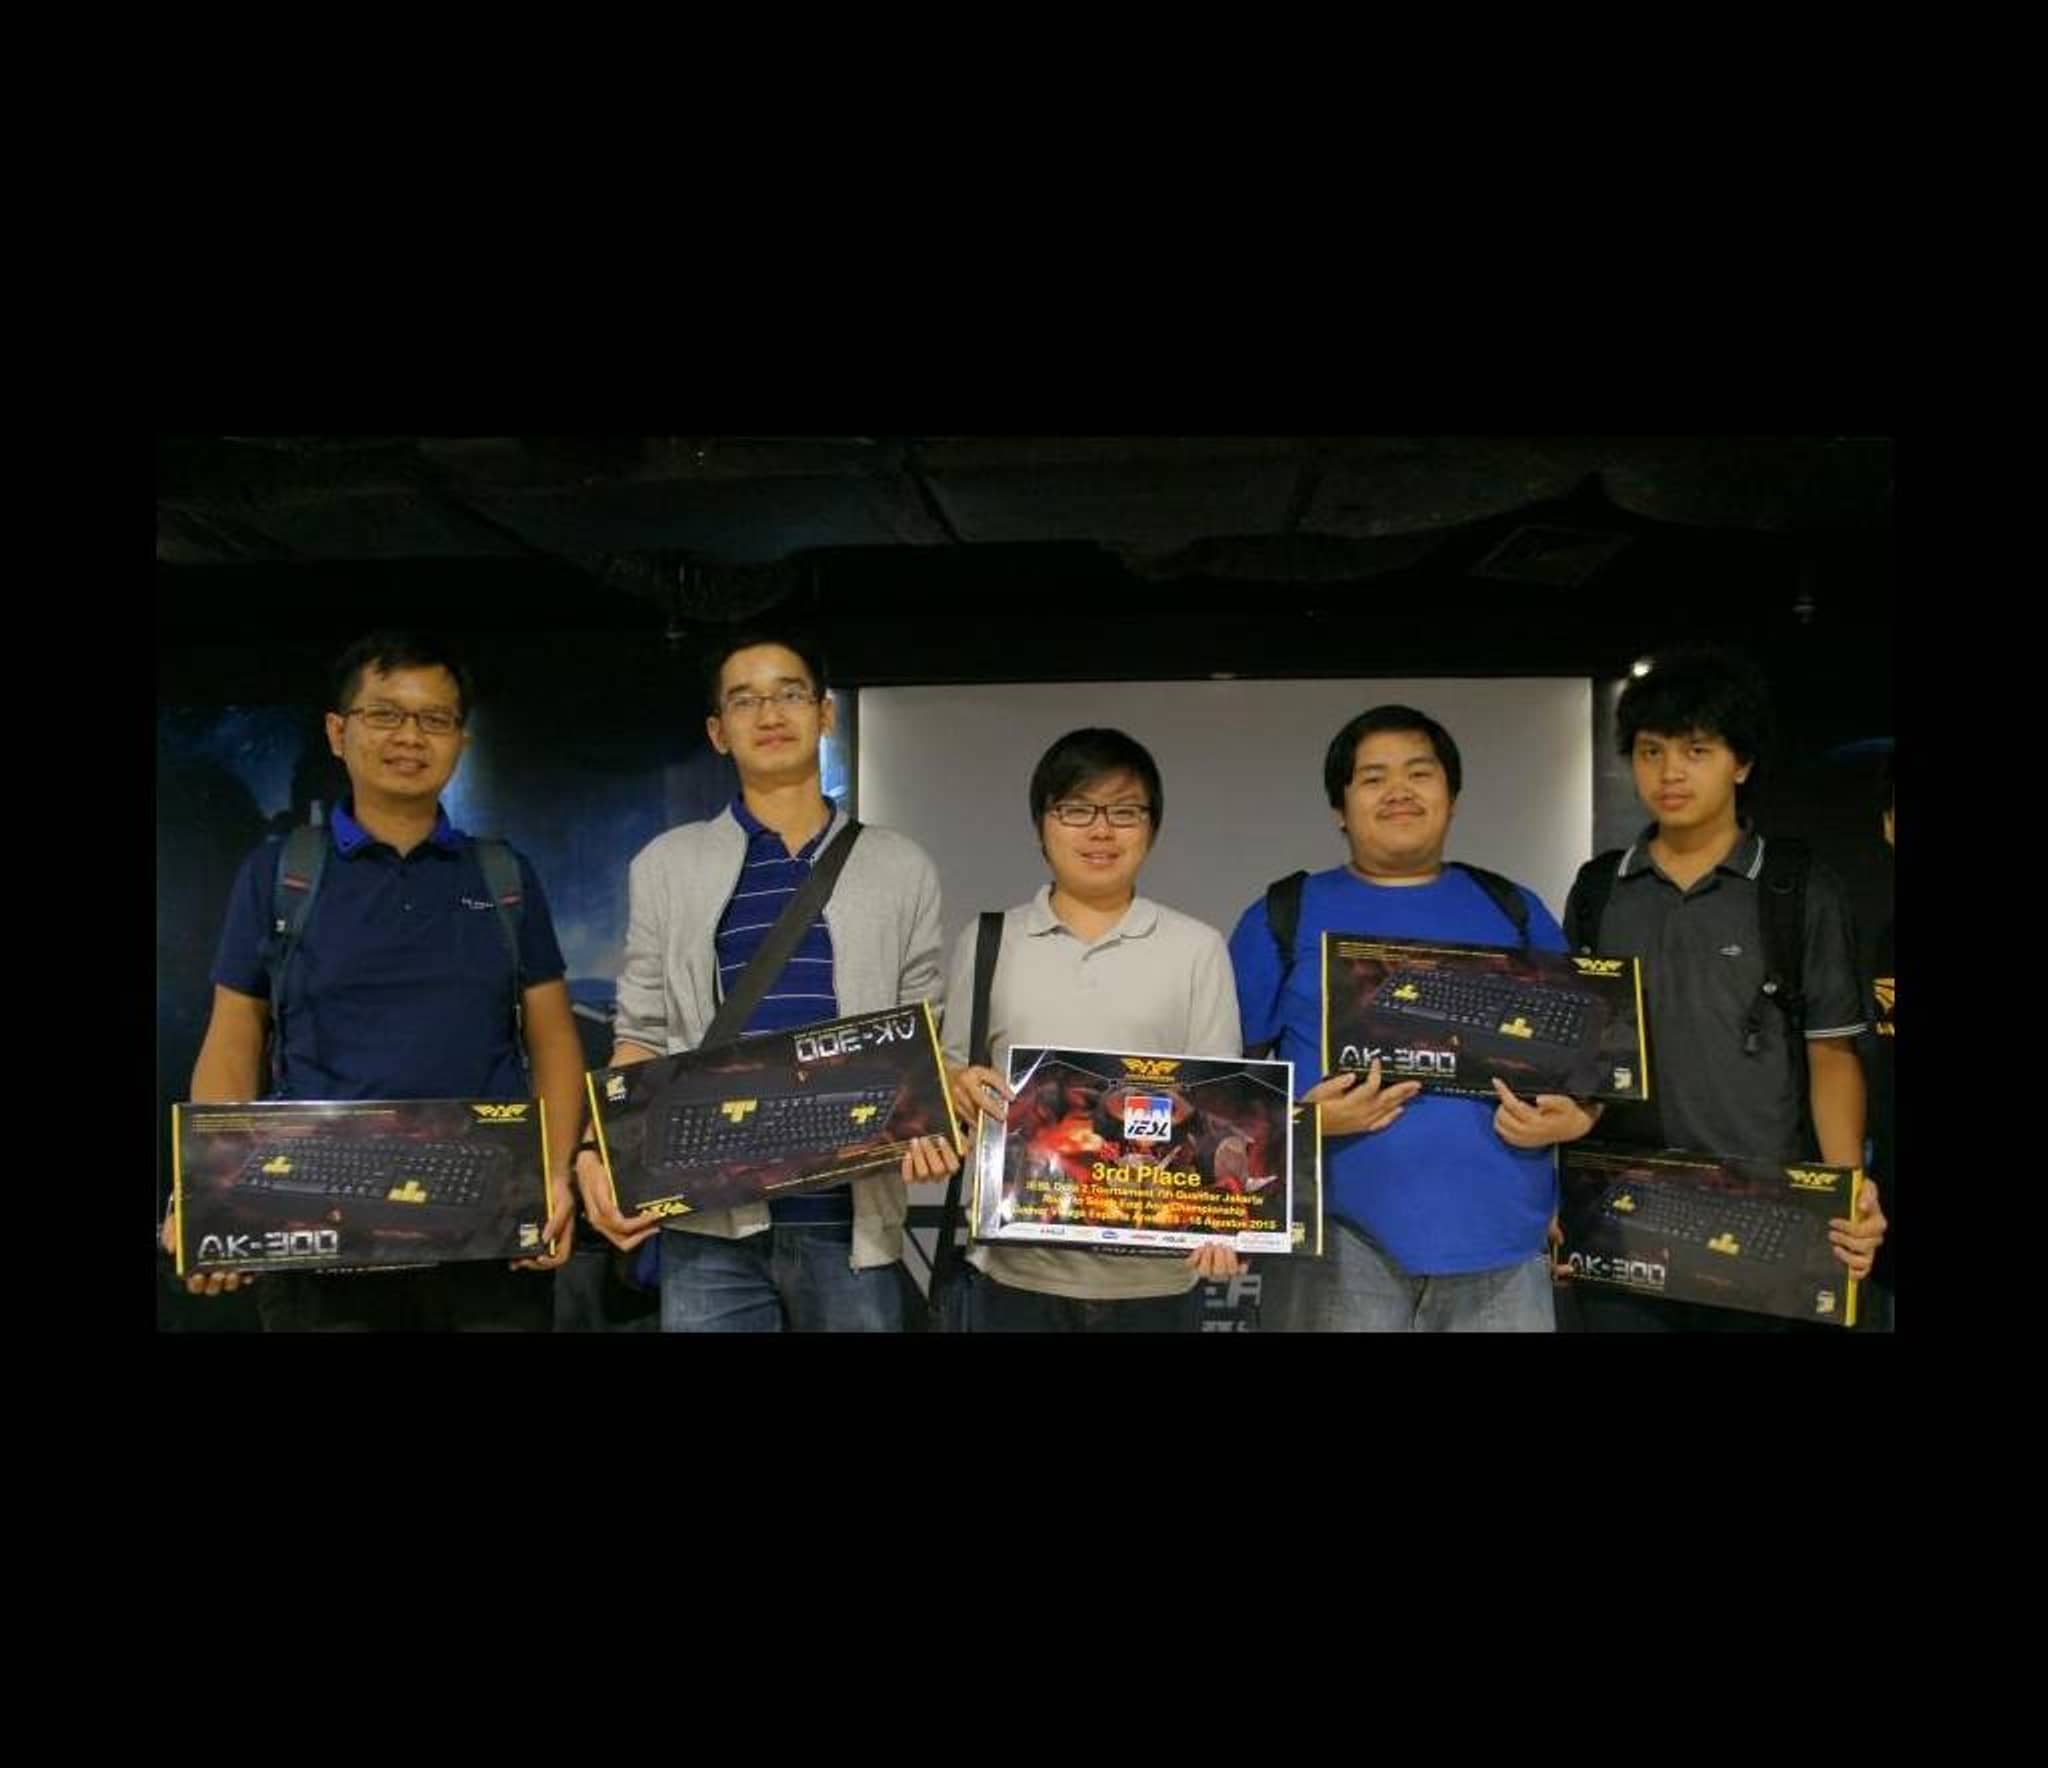 Getting 3rd place in Jakarta Qualifier of Indonesia Elite Super League (IESL) in 2015.